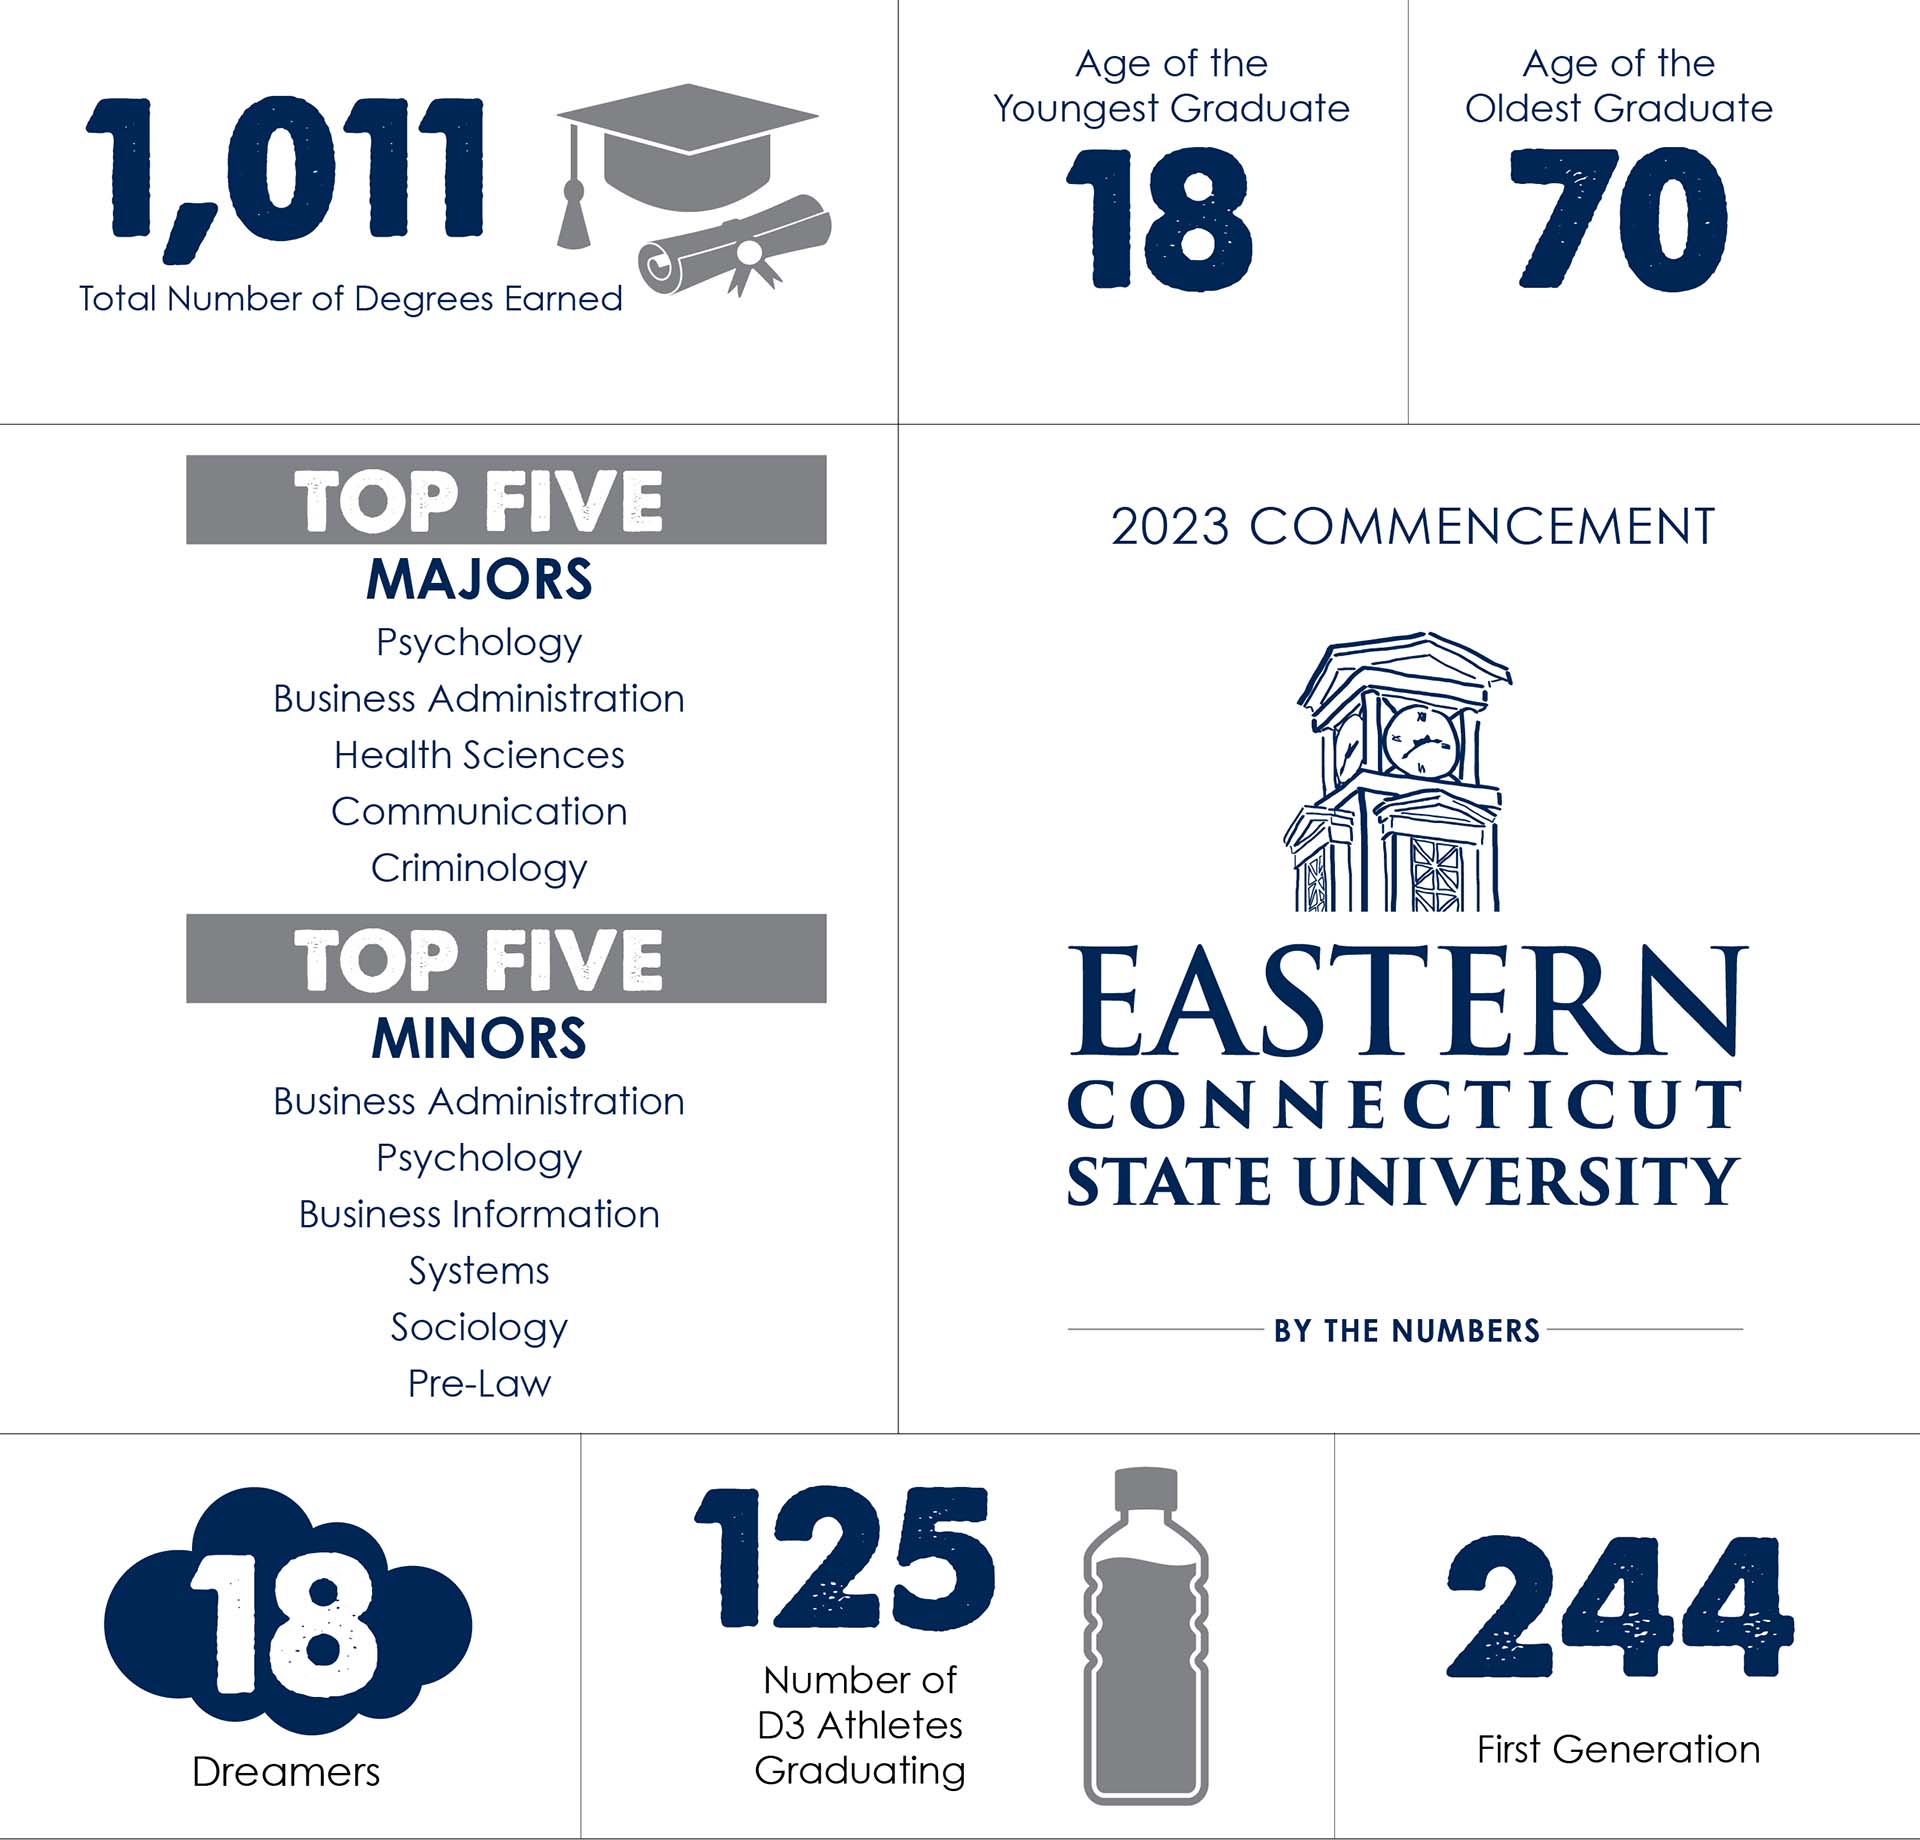 2023 Commencement By The Numbers: 1,011 Total Number of Degrees Earned; Age of the Youngest Graduate - 18; Age of the Oldest Graduate - 70; Top Five Majors: Psychology, Business Administration, Health Sciences, Communication, Crimniology; Top Five Minors: Business Administration, Psychology, Business Information Systems, Sociology, Pre-Law; 18 Dreamers; Number of D3 Athletes Graduating - 125; 244 First Generation